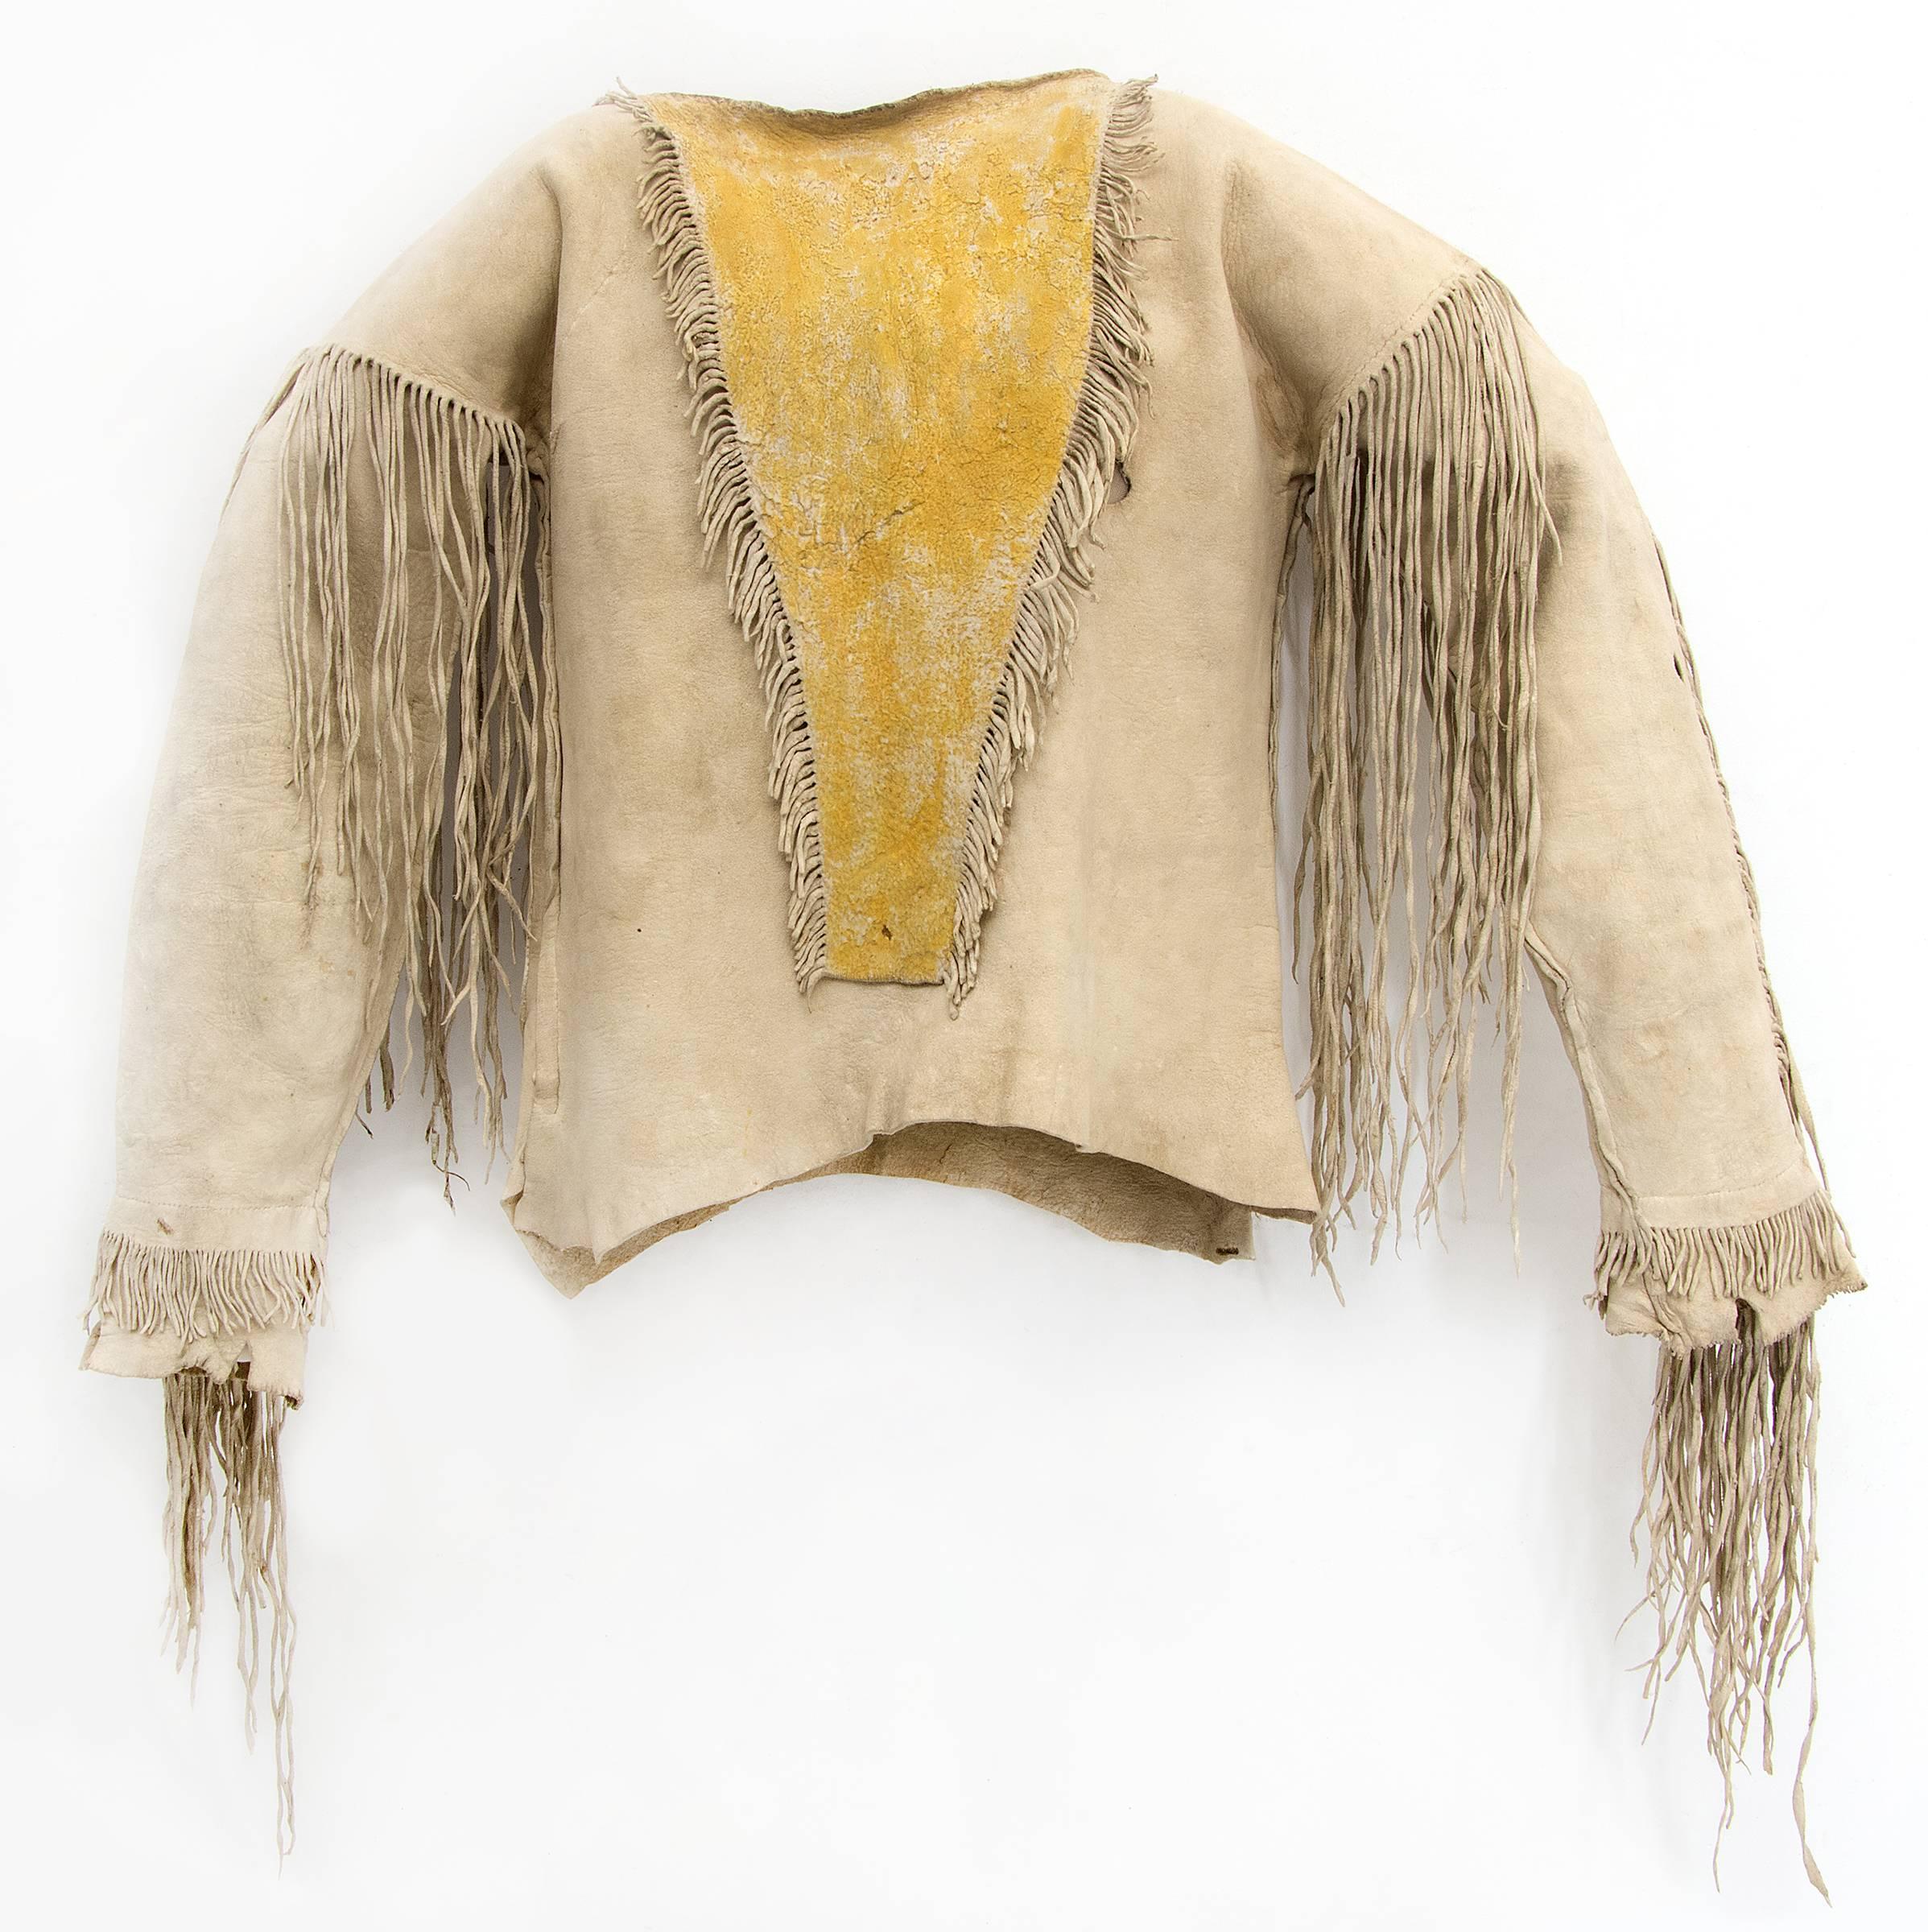 A shirt and leggings created for a boy (youth) composed of native tanned hide with fringe and yellow ochre pigment.

Overall dimensions of all pieces as displayed measure 60 x 46 x 2 inches
Shirt measures: 24 x 59 inches (with arms